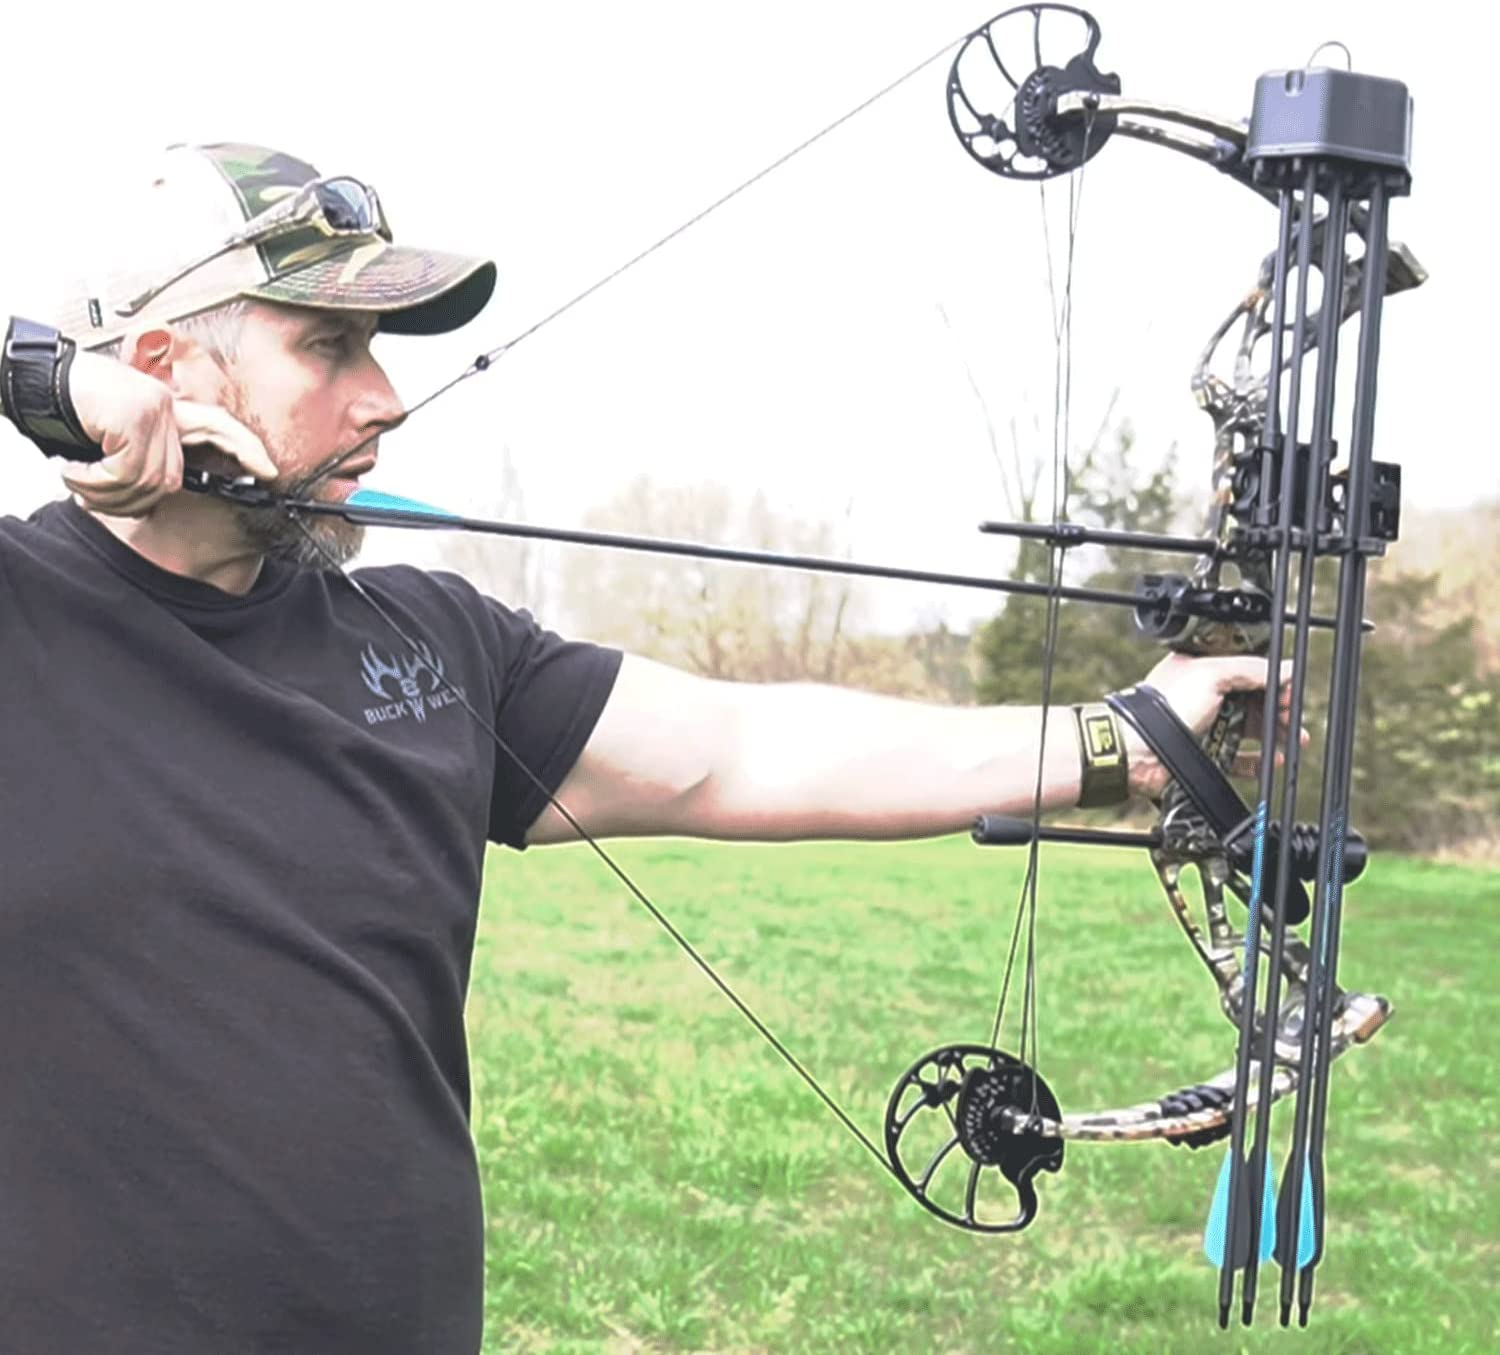 WUXLISTY Compound Bow and Arrow for Adult and Beginner - D-Loop